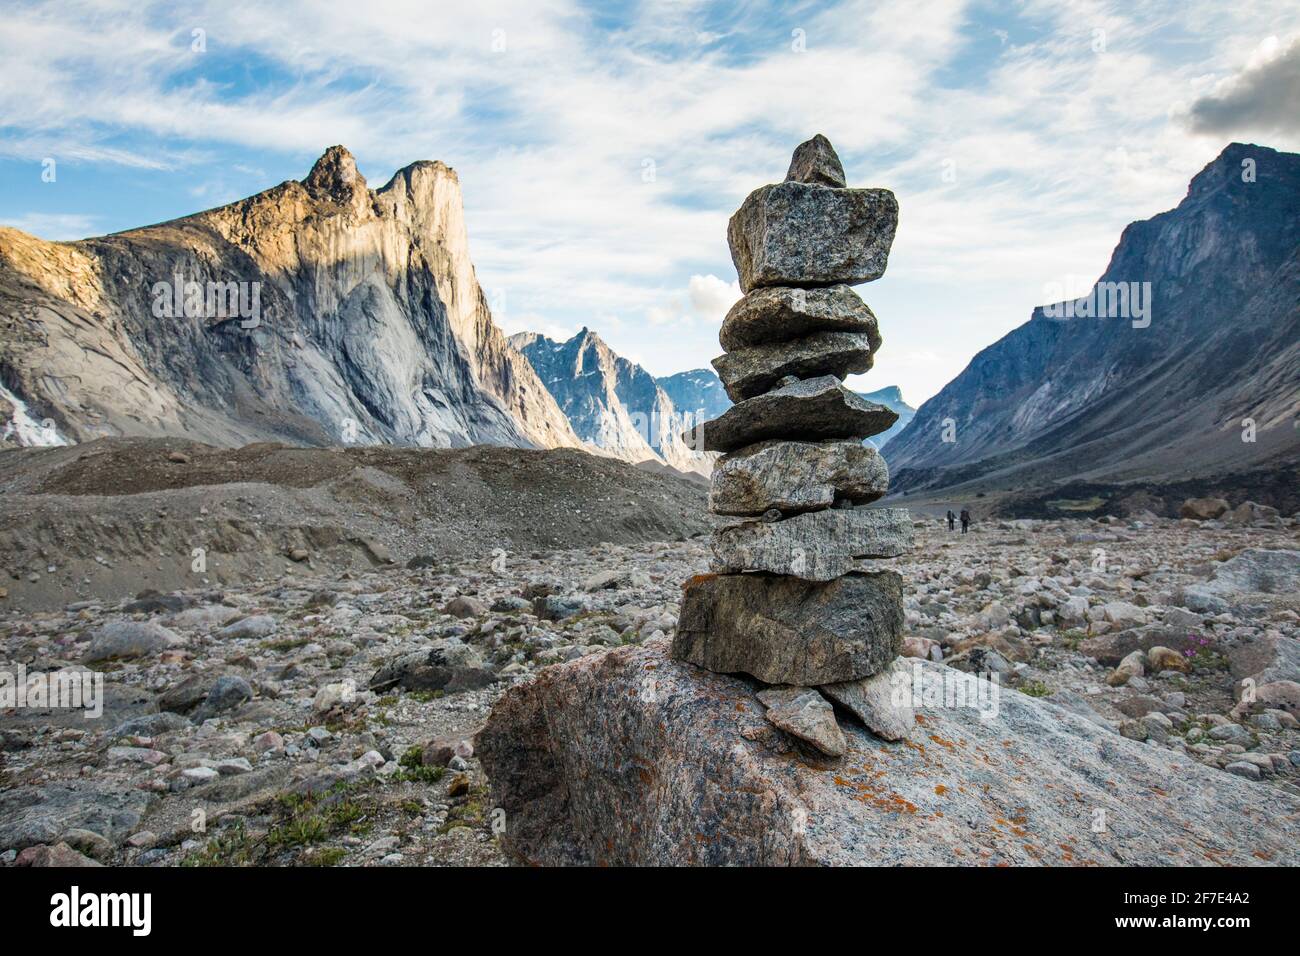 Rock cairn and mountain summit, Baffin Island. Stock Photo